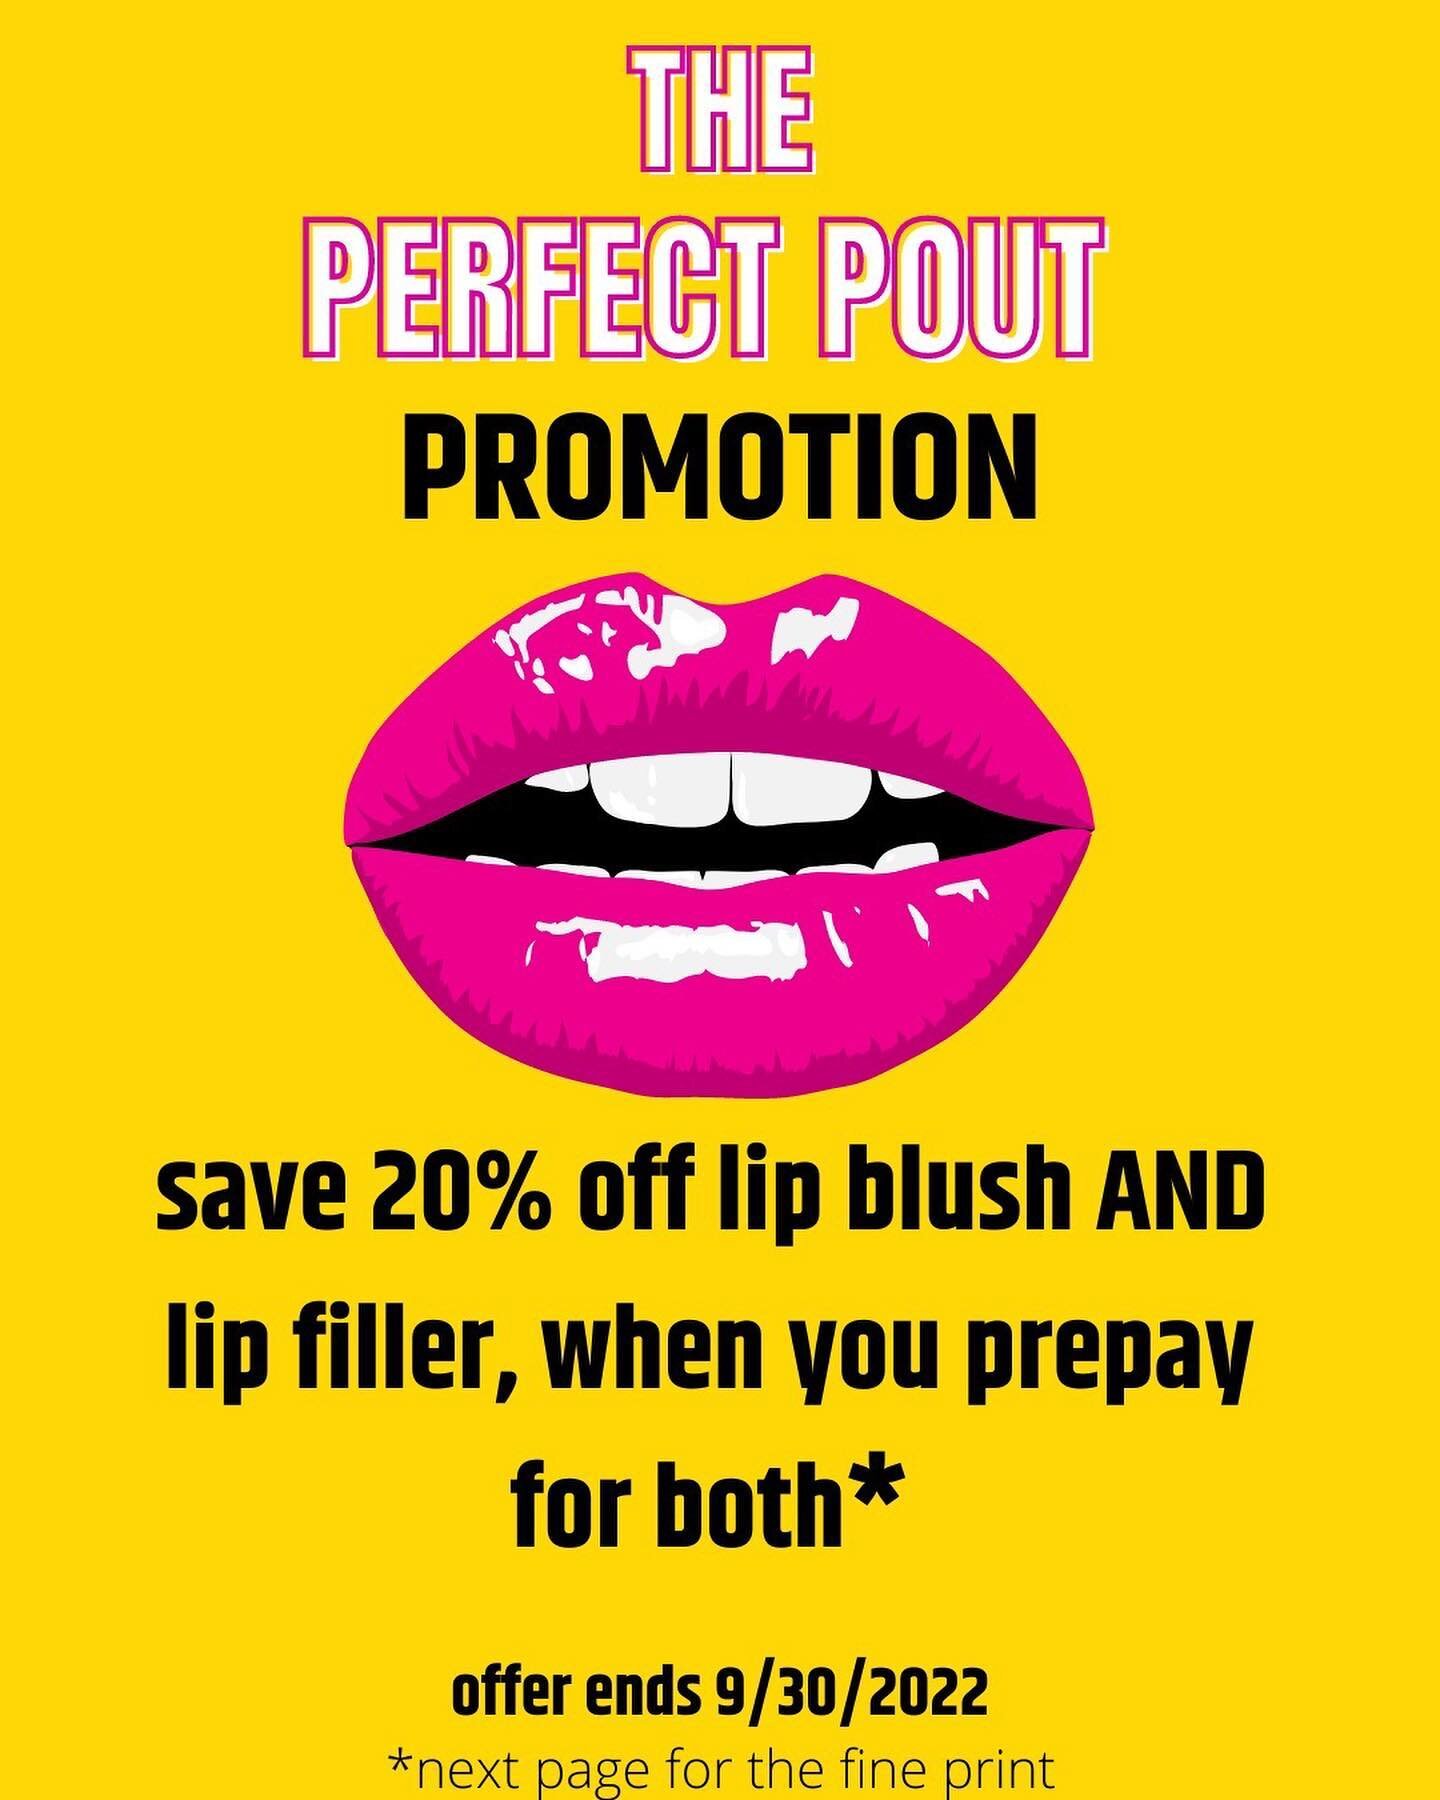 So excited about this promo!! #perfectpout #lipfiller #baltimorelipfiller #baltimorelipblush #liptattoo #lipblush #baltimoremakeup #kissme #lipflip #lipgloss